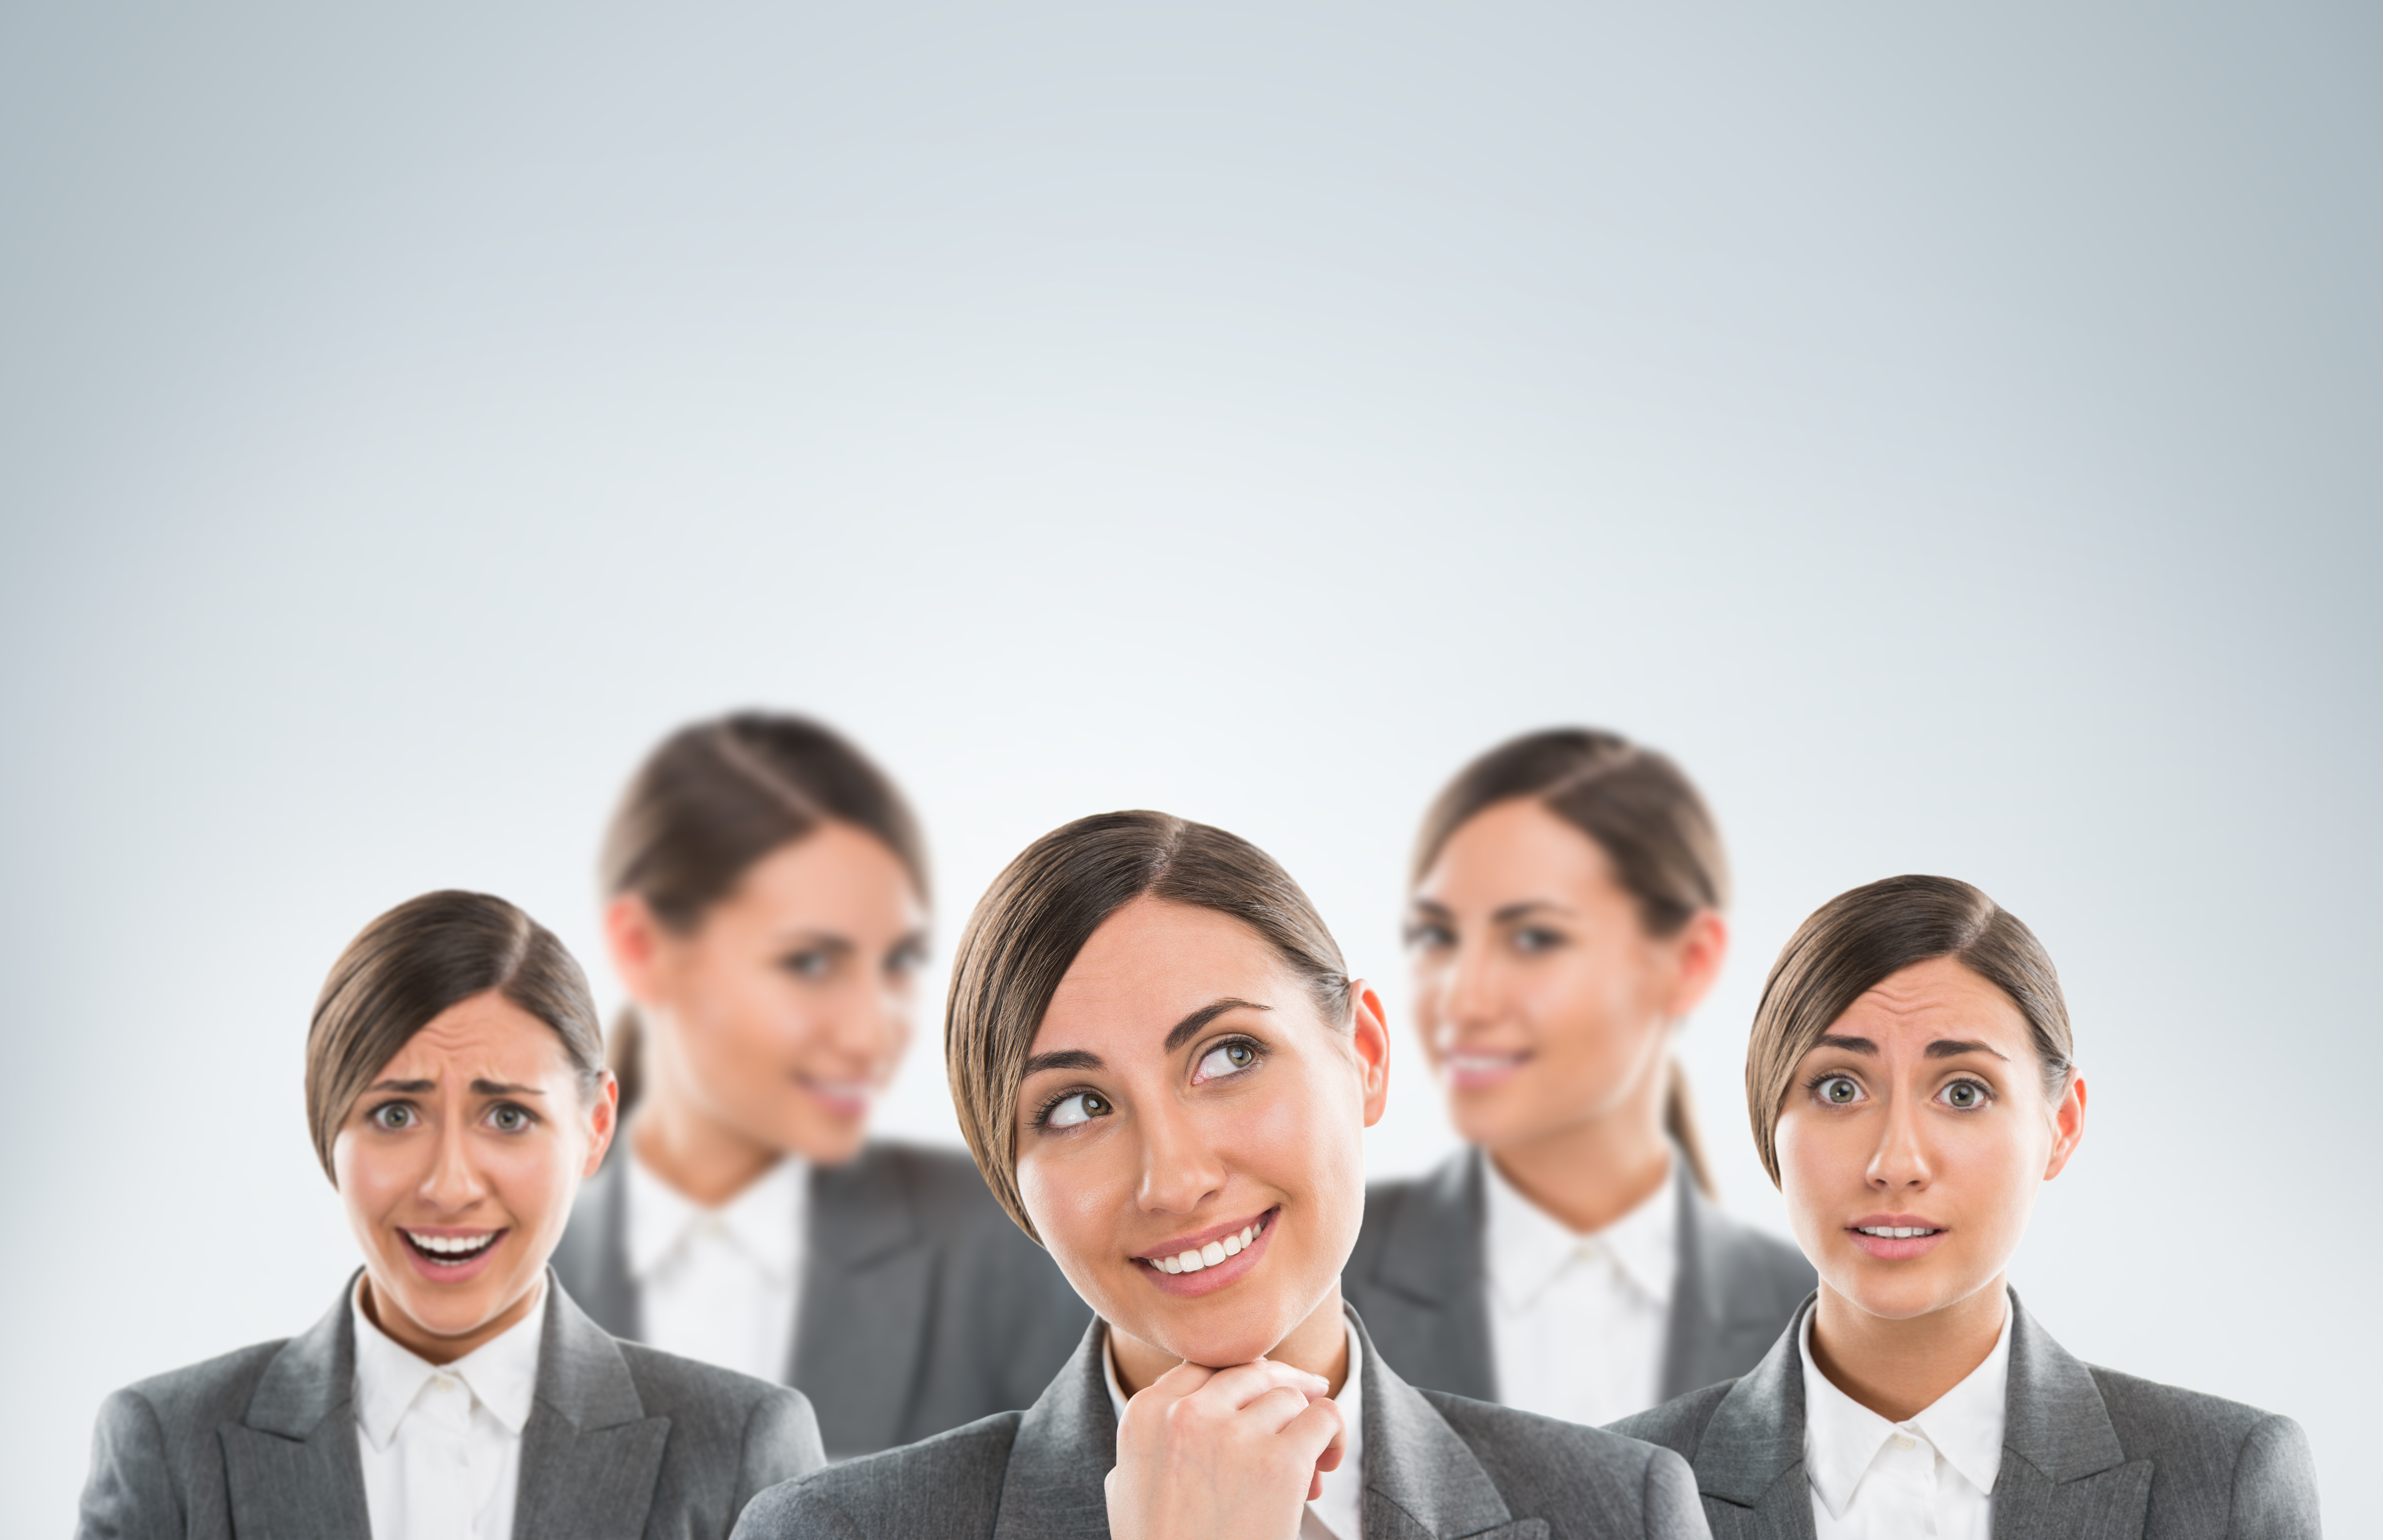 Group of business women clones with different expressions [Will the real Mid-Level Program please stand up?]